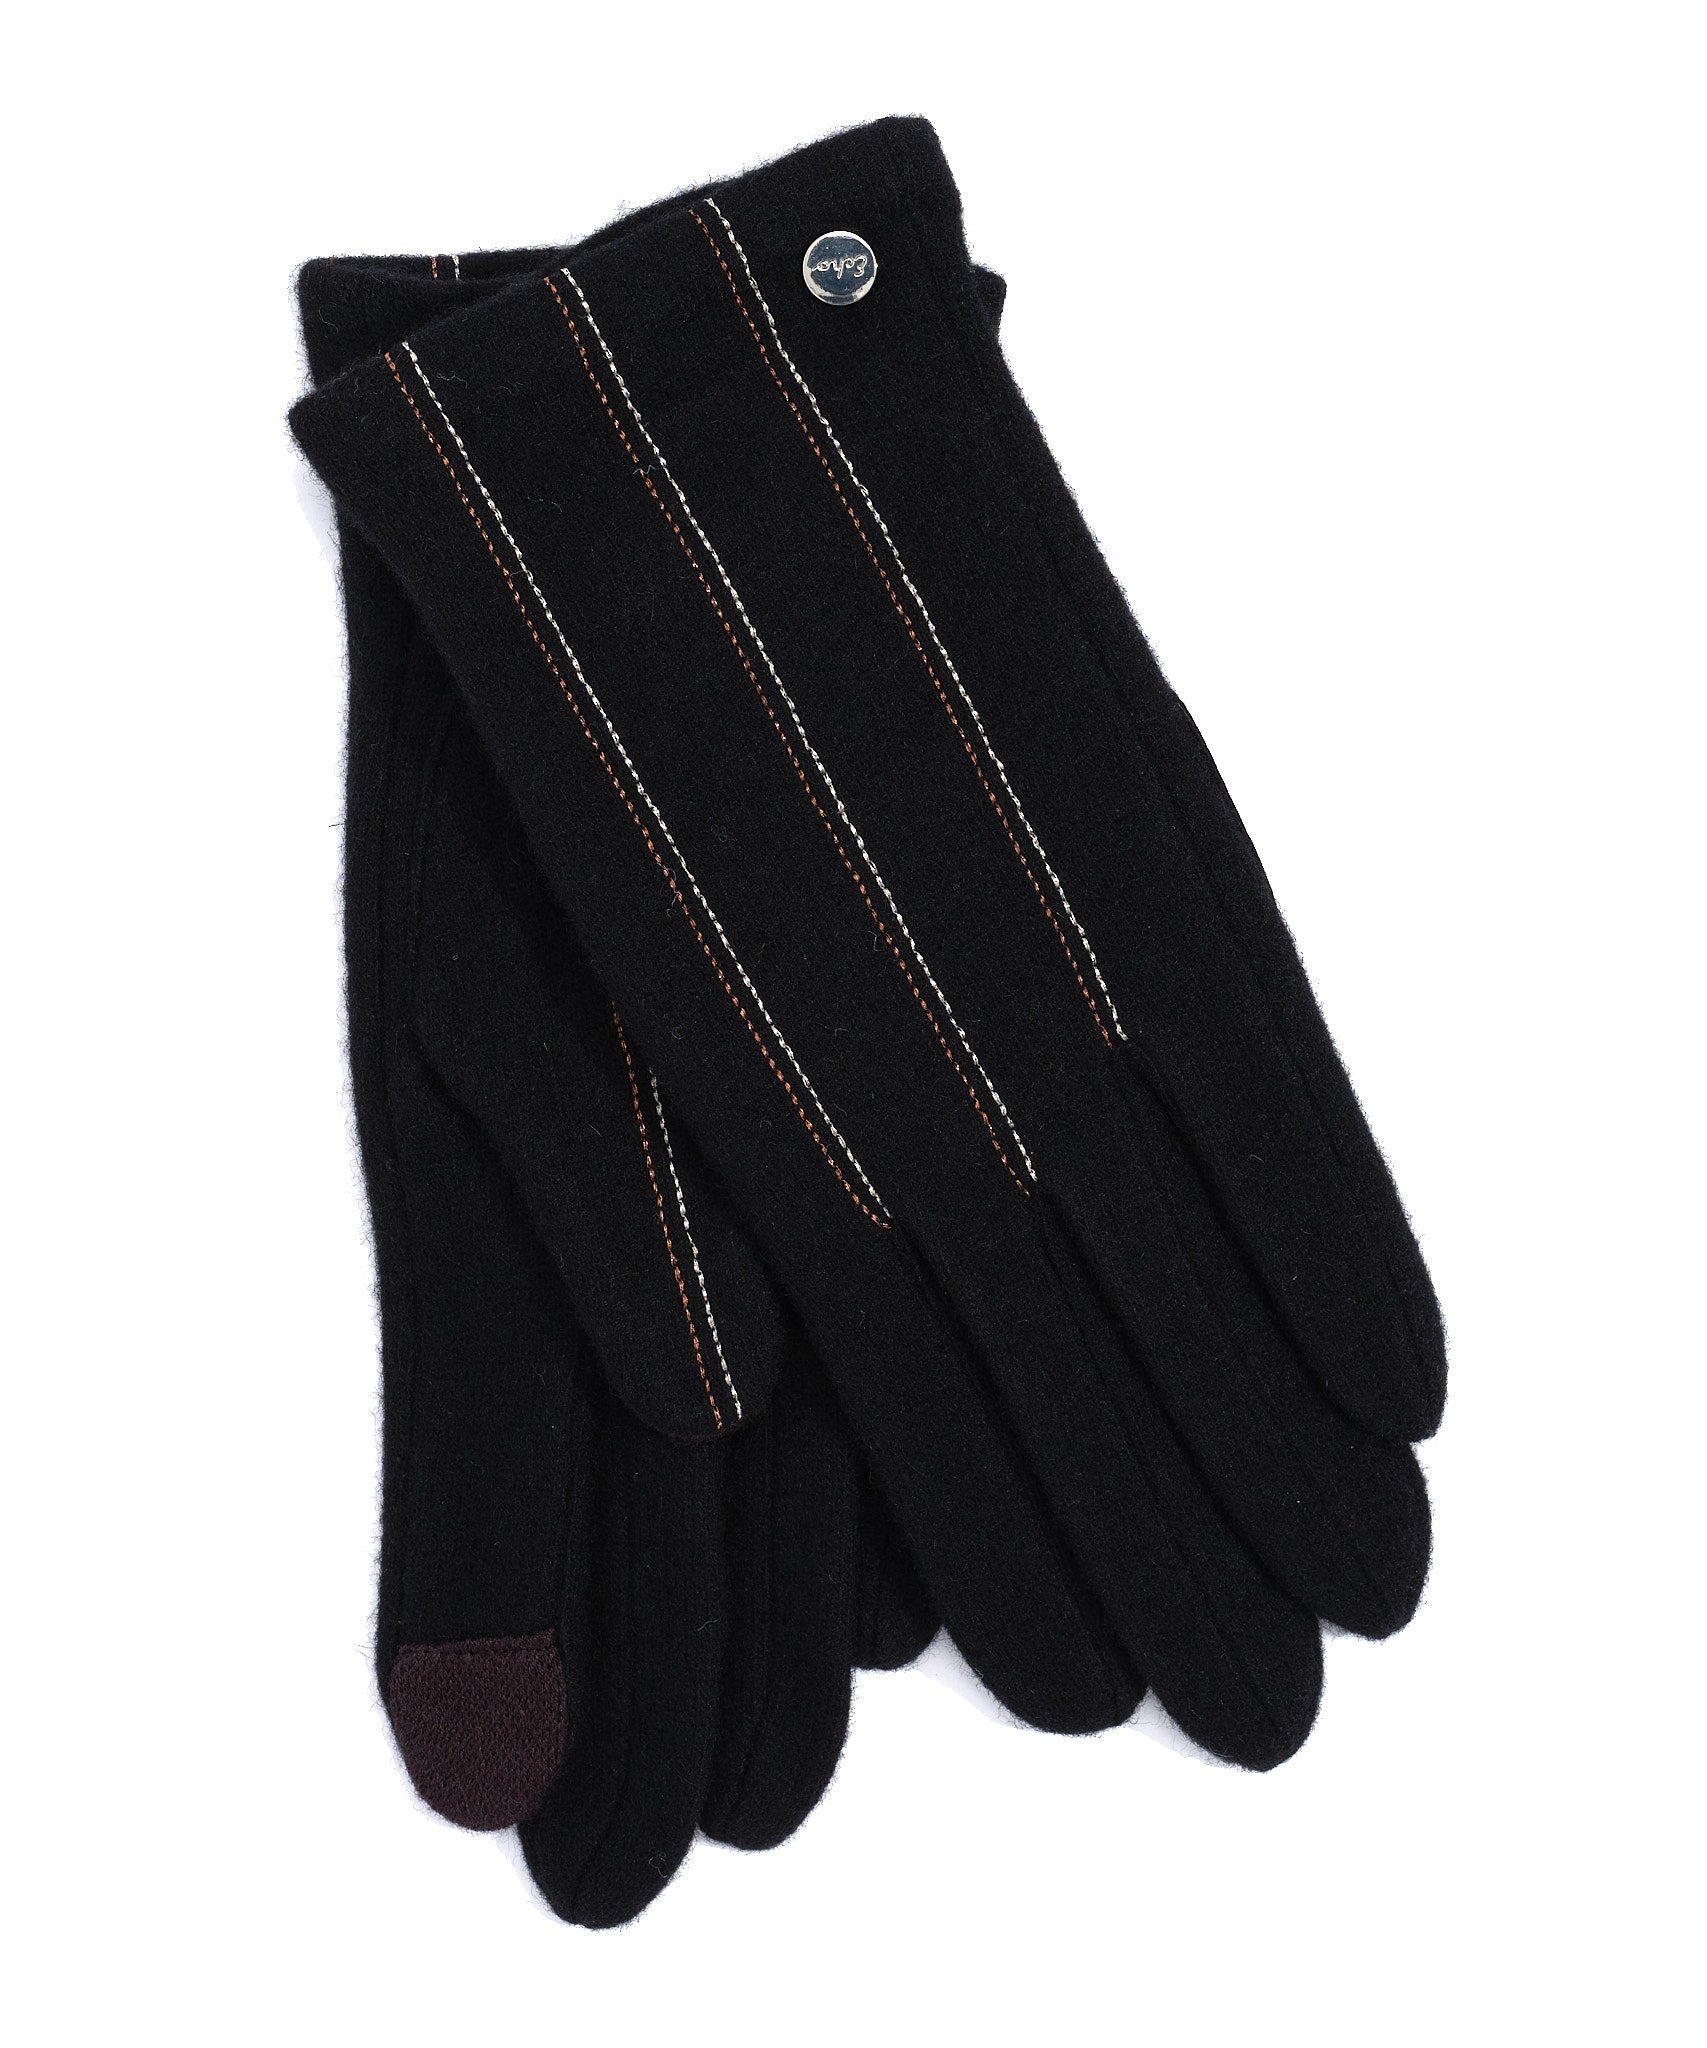 Metallic Embroidered Glove in color Black